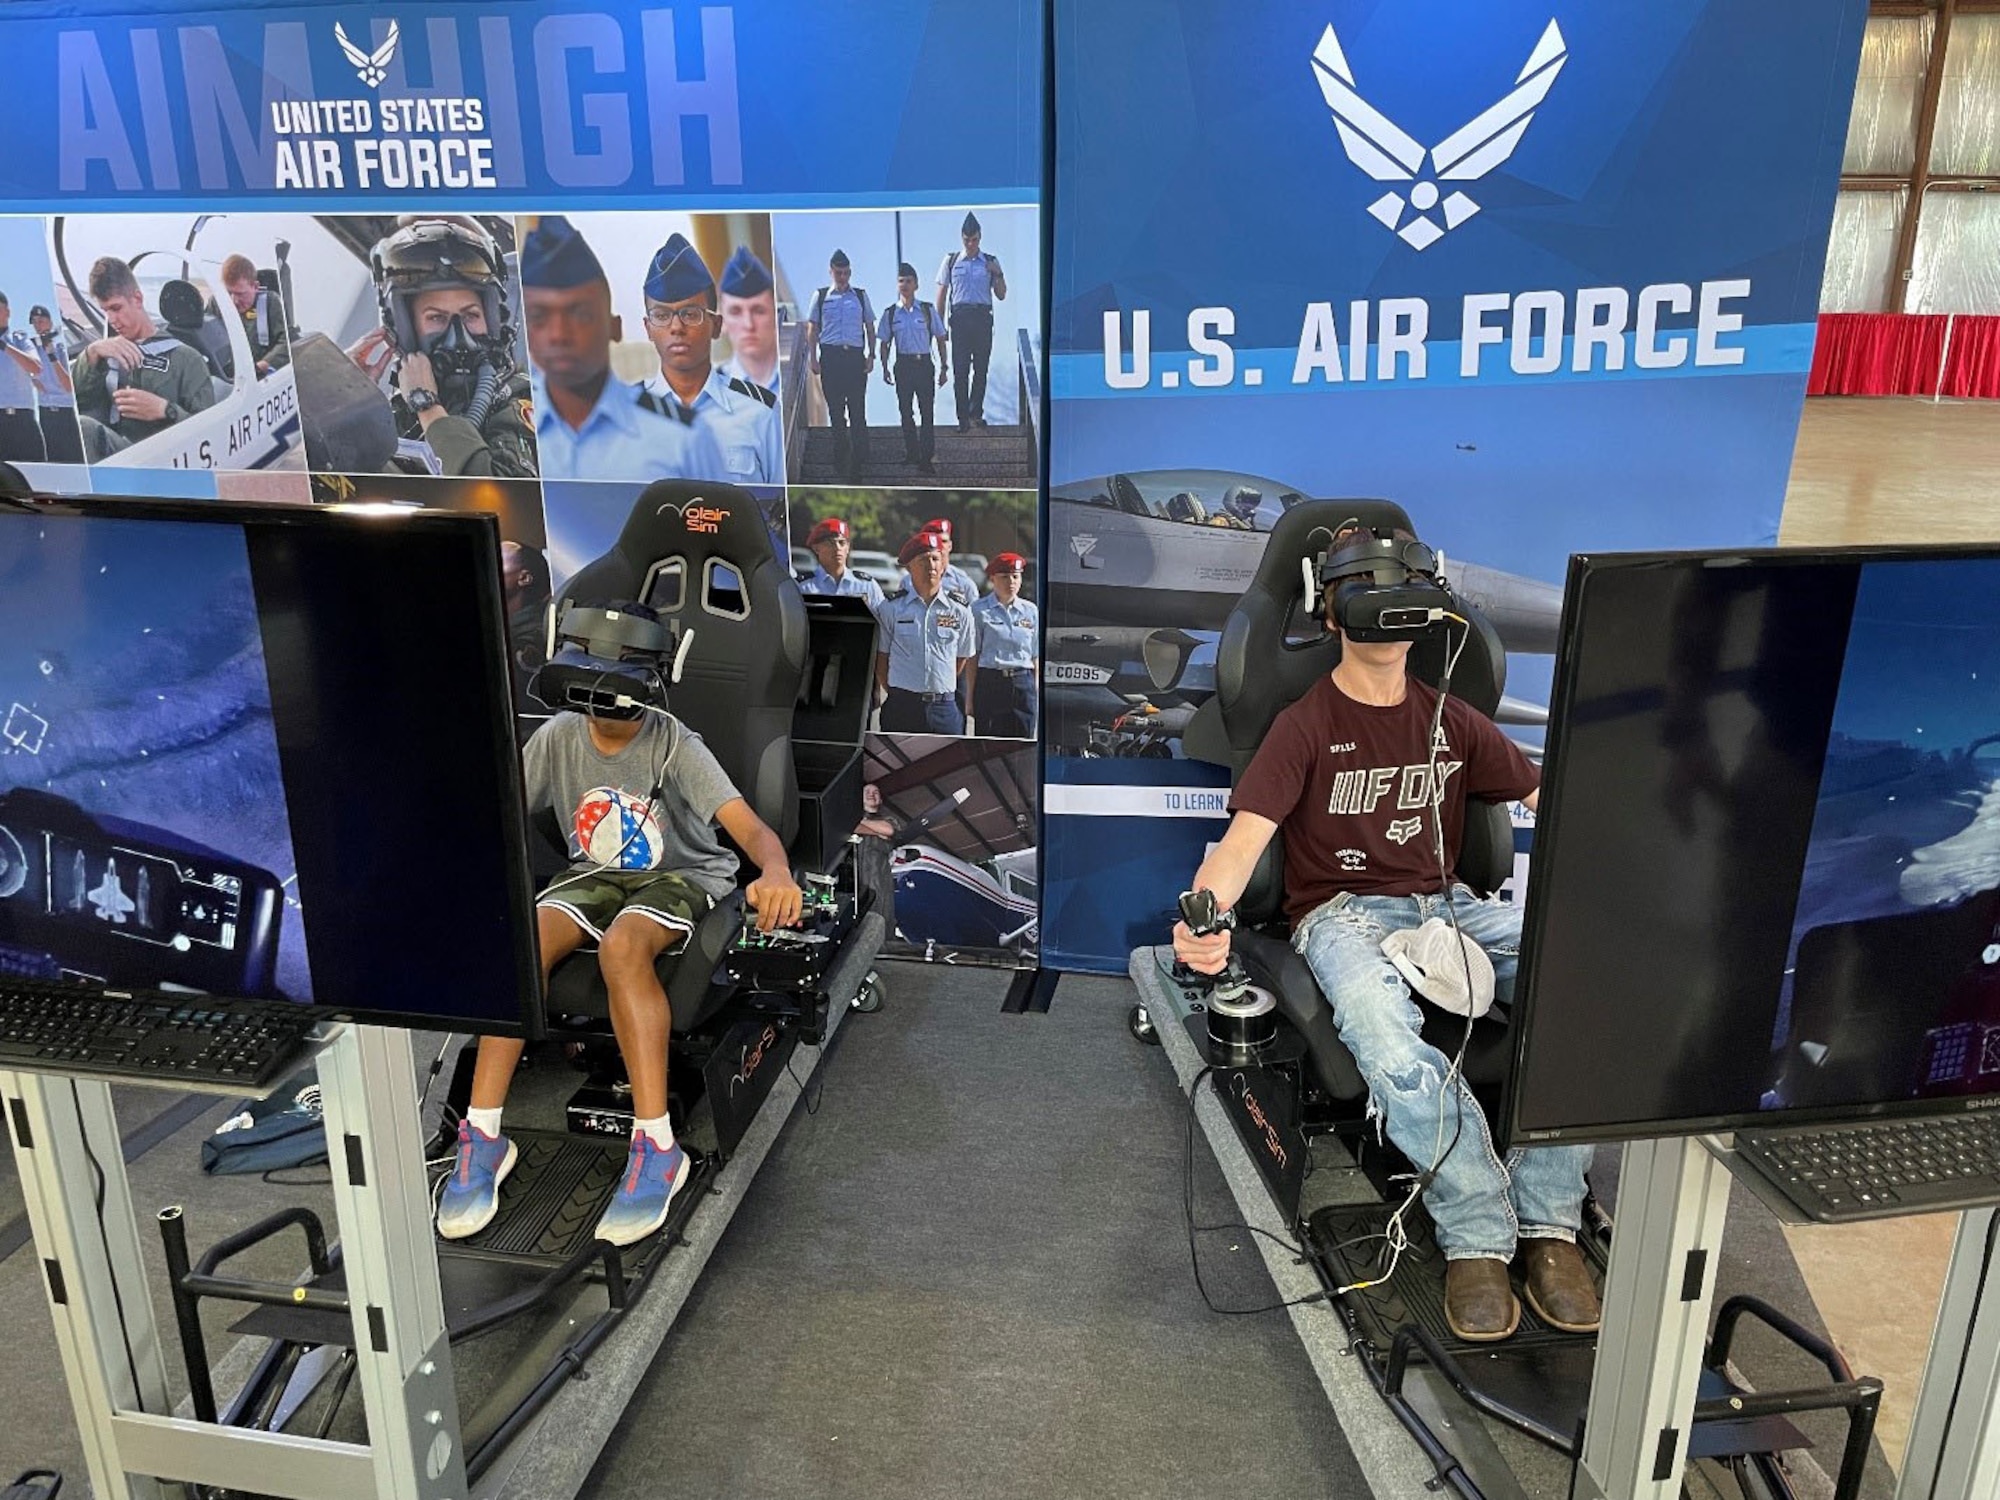 Two students compete with a flight simulator game sponsored by the U.S. Air Force Recruiting Service Detachment 1 at the Experimental Aircraft Association (EAA) AirVenture Air Show at Oshkosh, Wis., July 26, 2021.